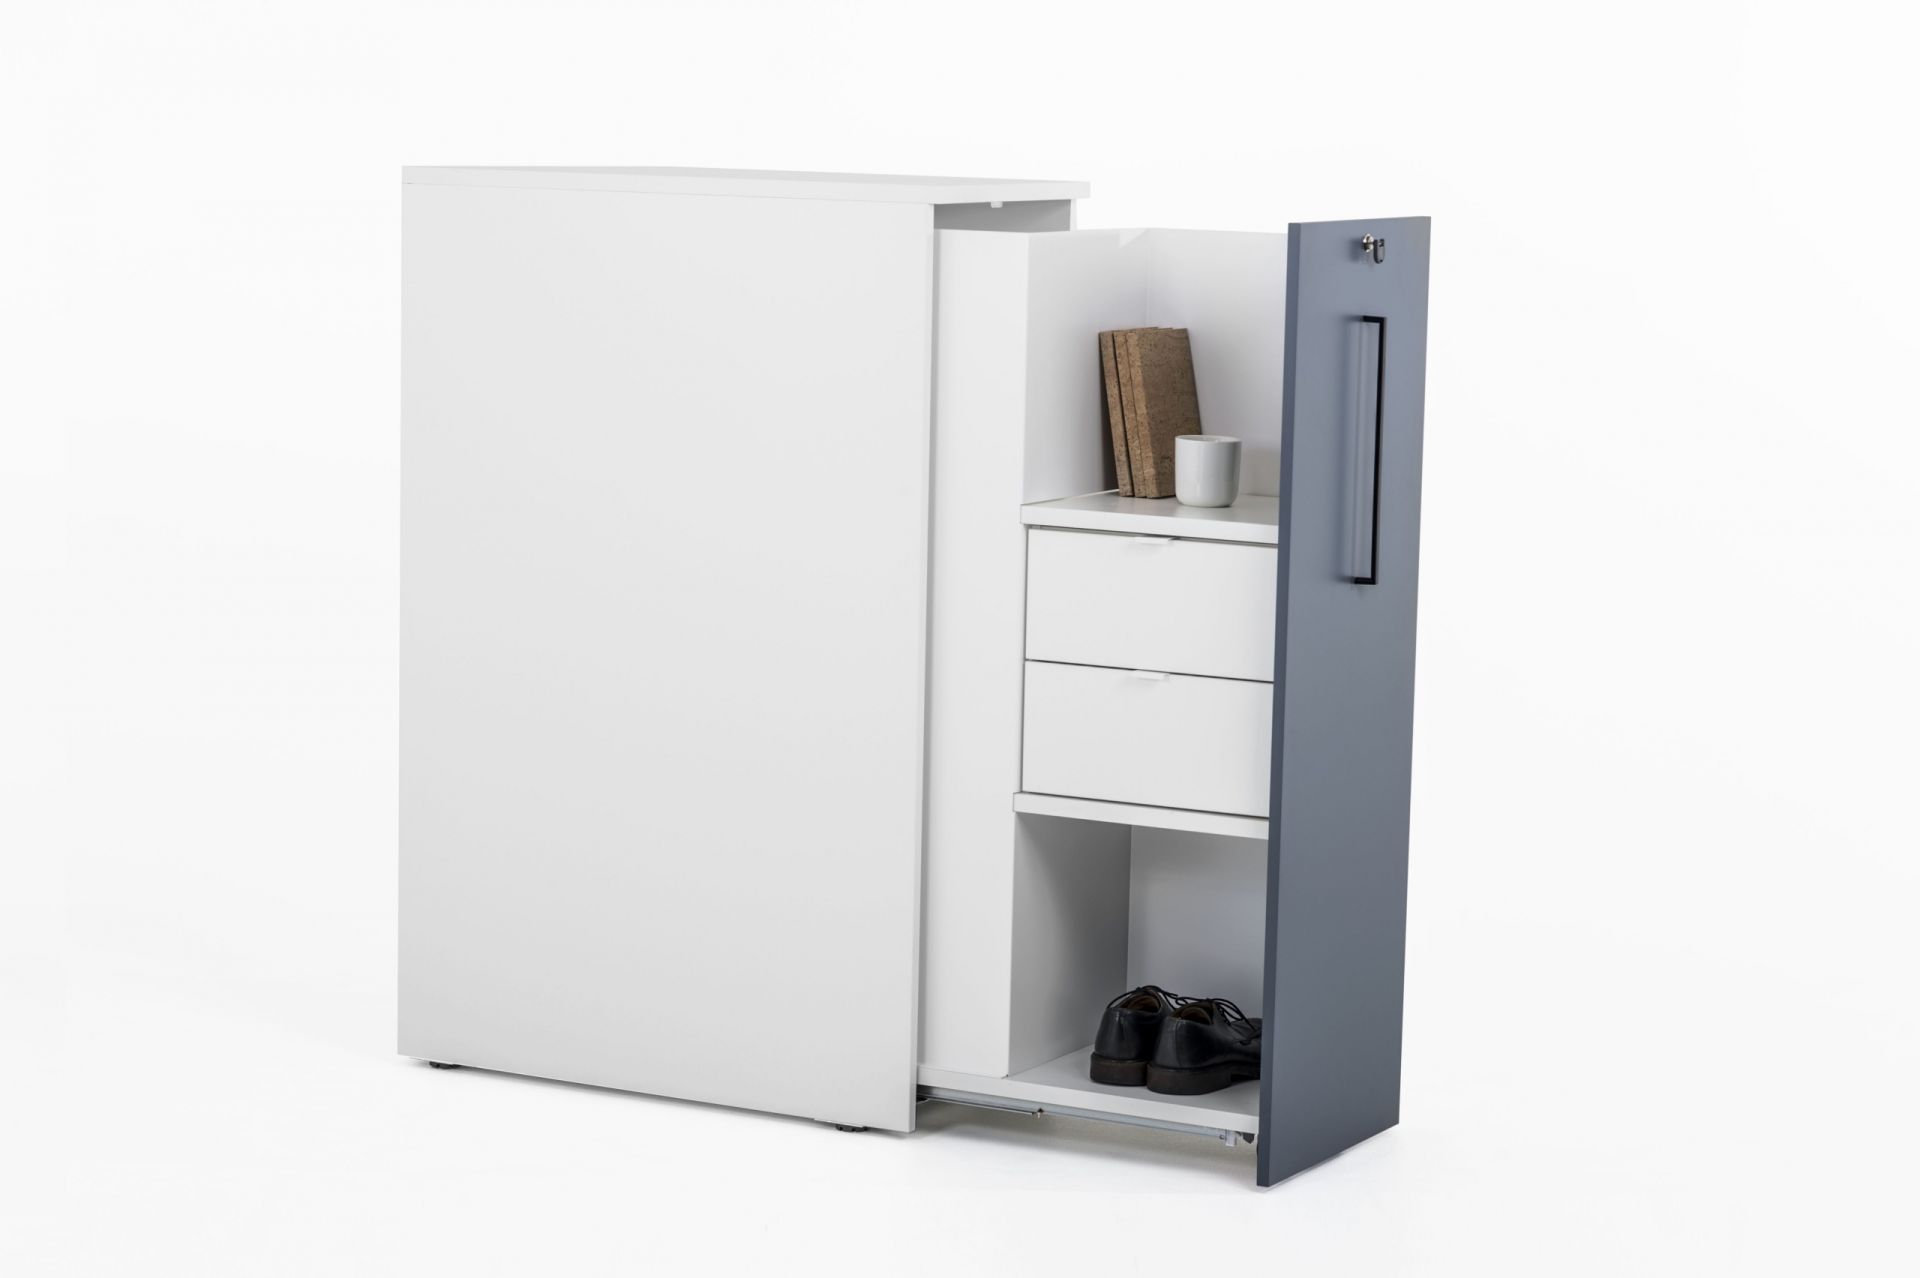 Hold Tower cabinet product image 3